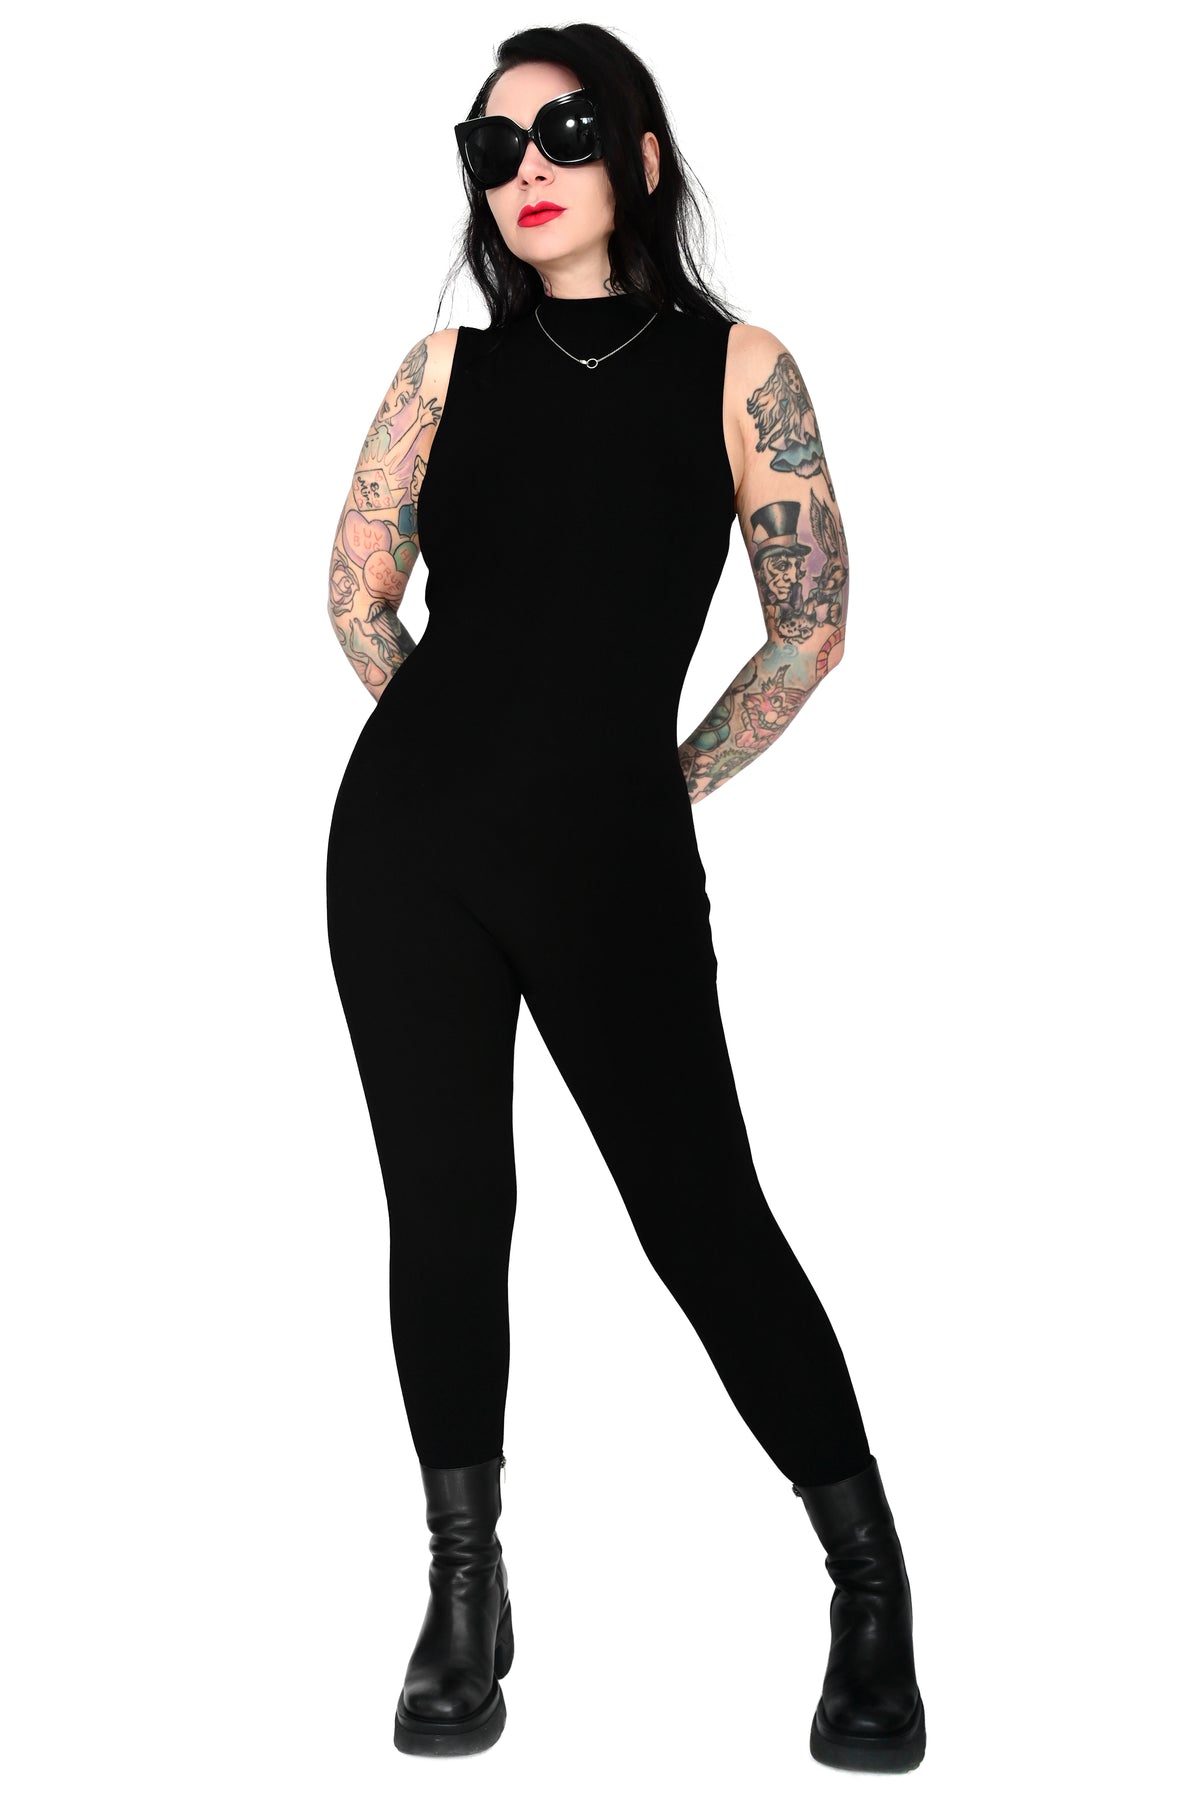 black sleeveless high neck catsuit on a size M model